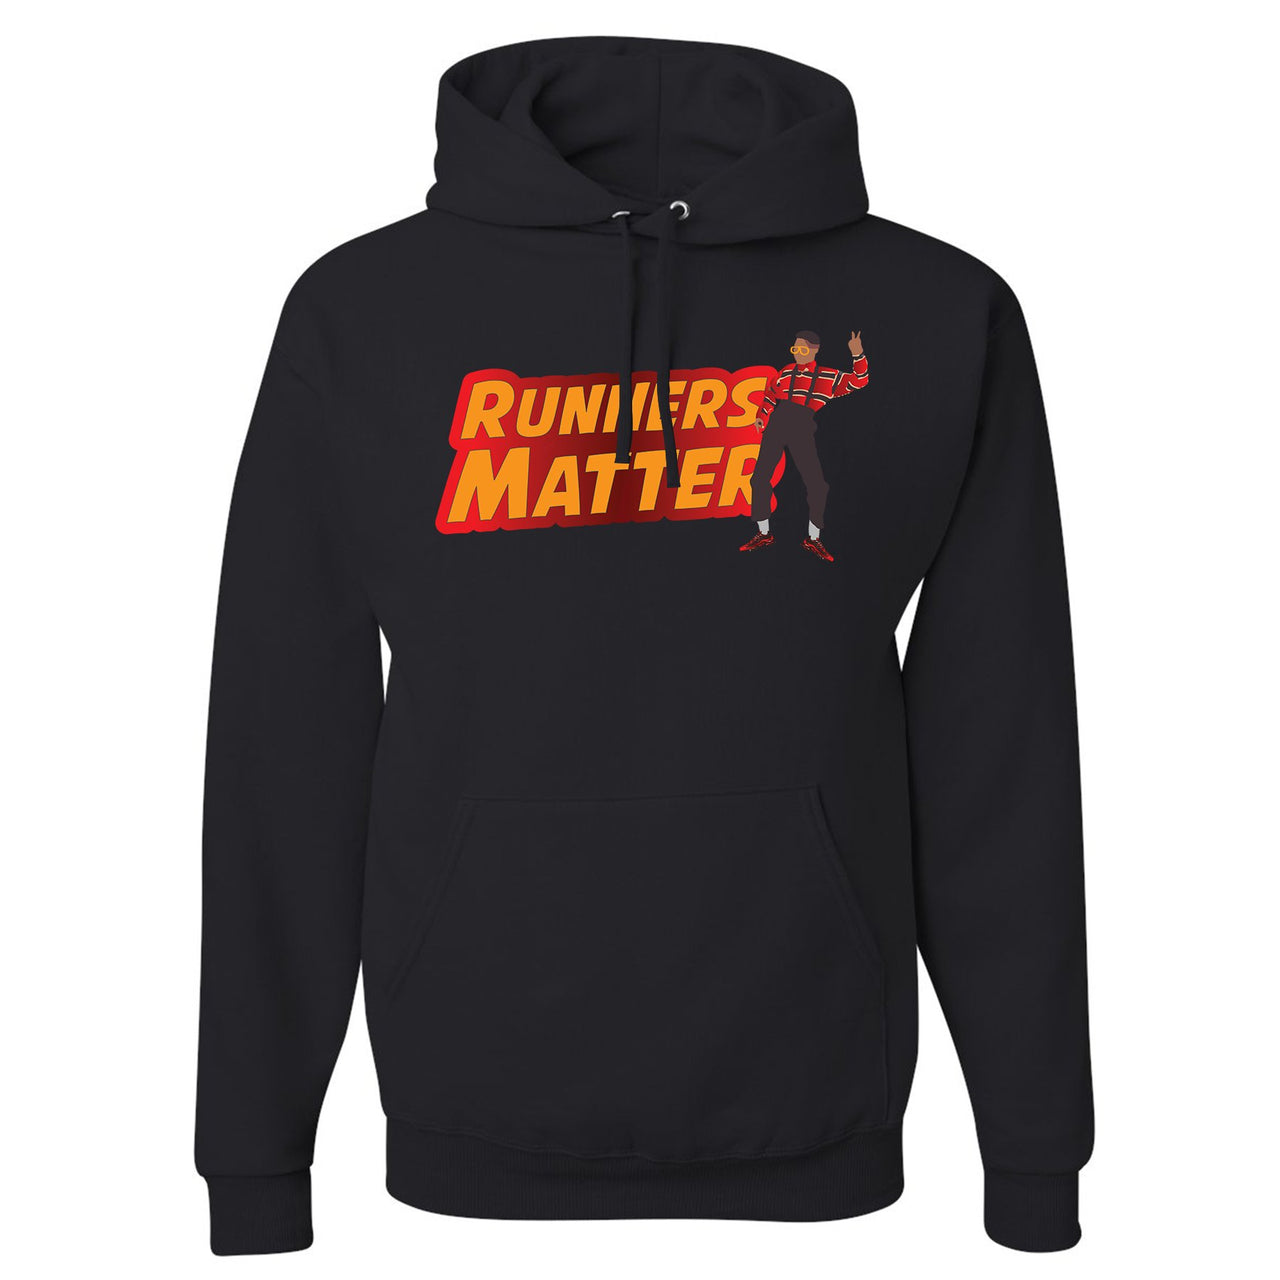 printed on the front of the air max plus sunburst sneaker matching runners matter pullover hoodie is the runners matter logo